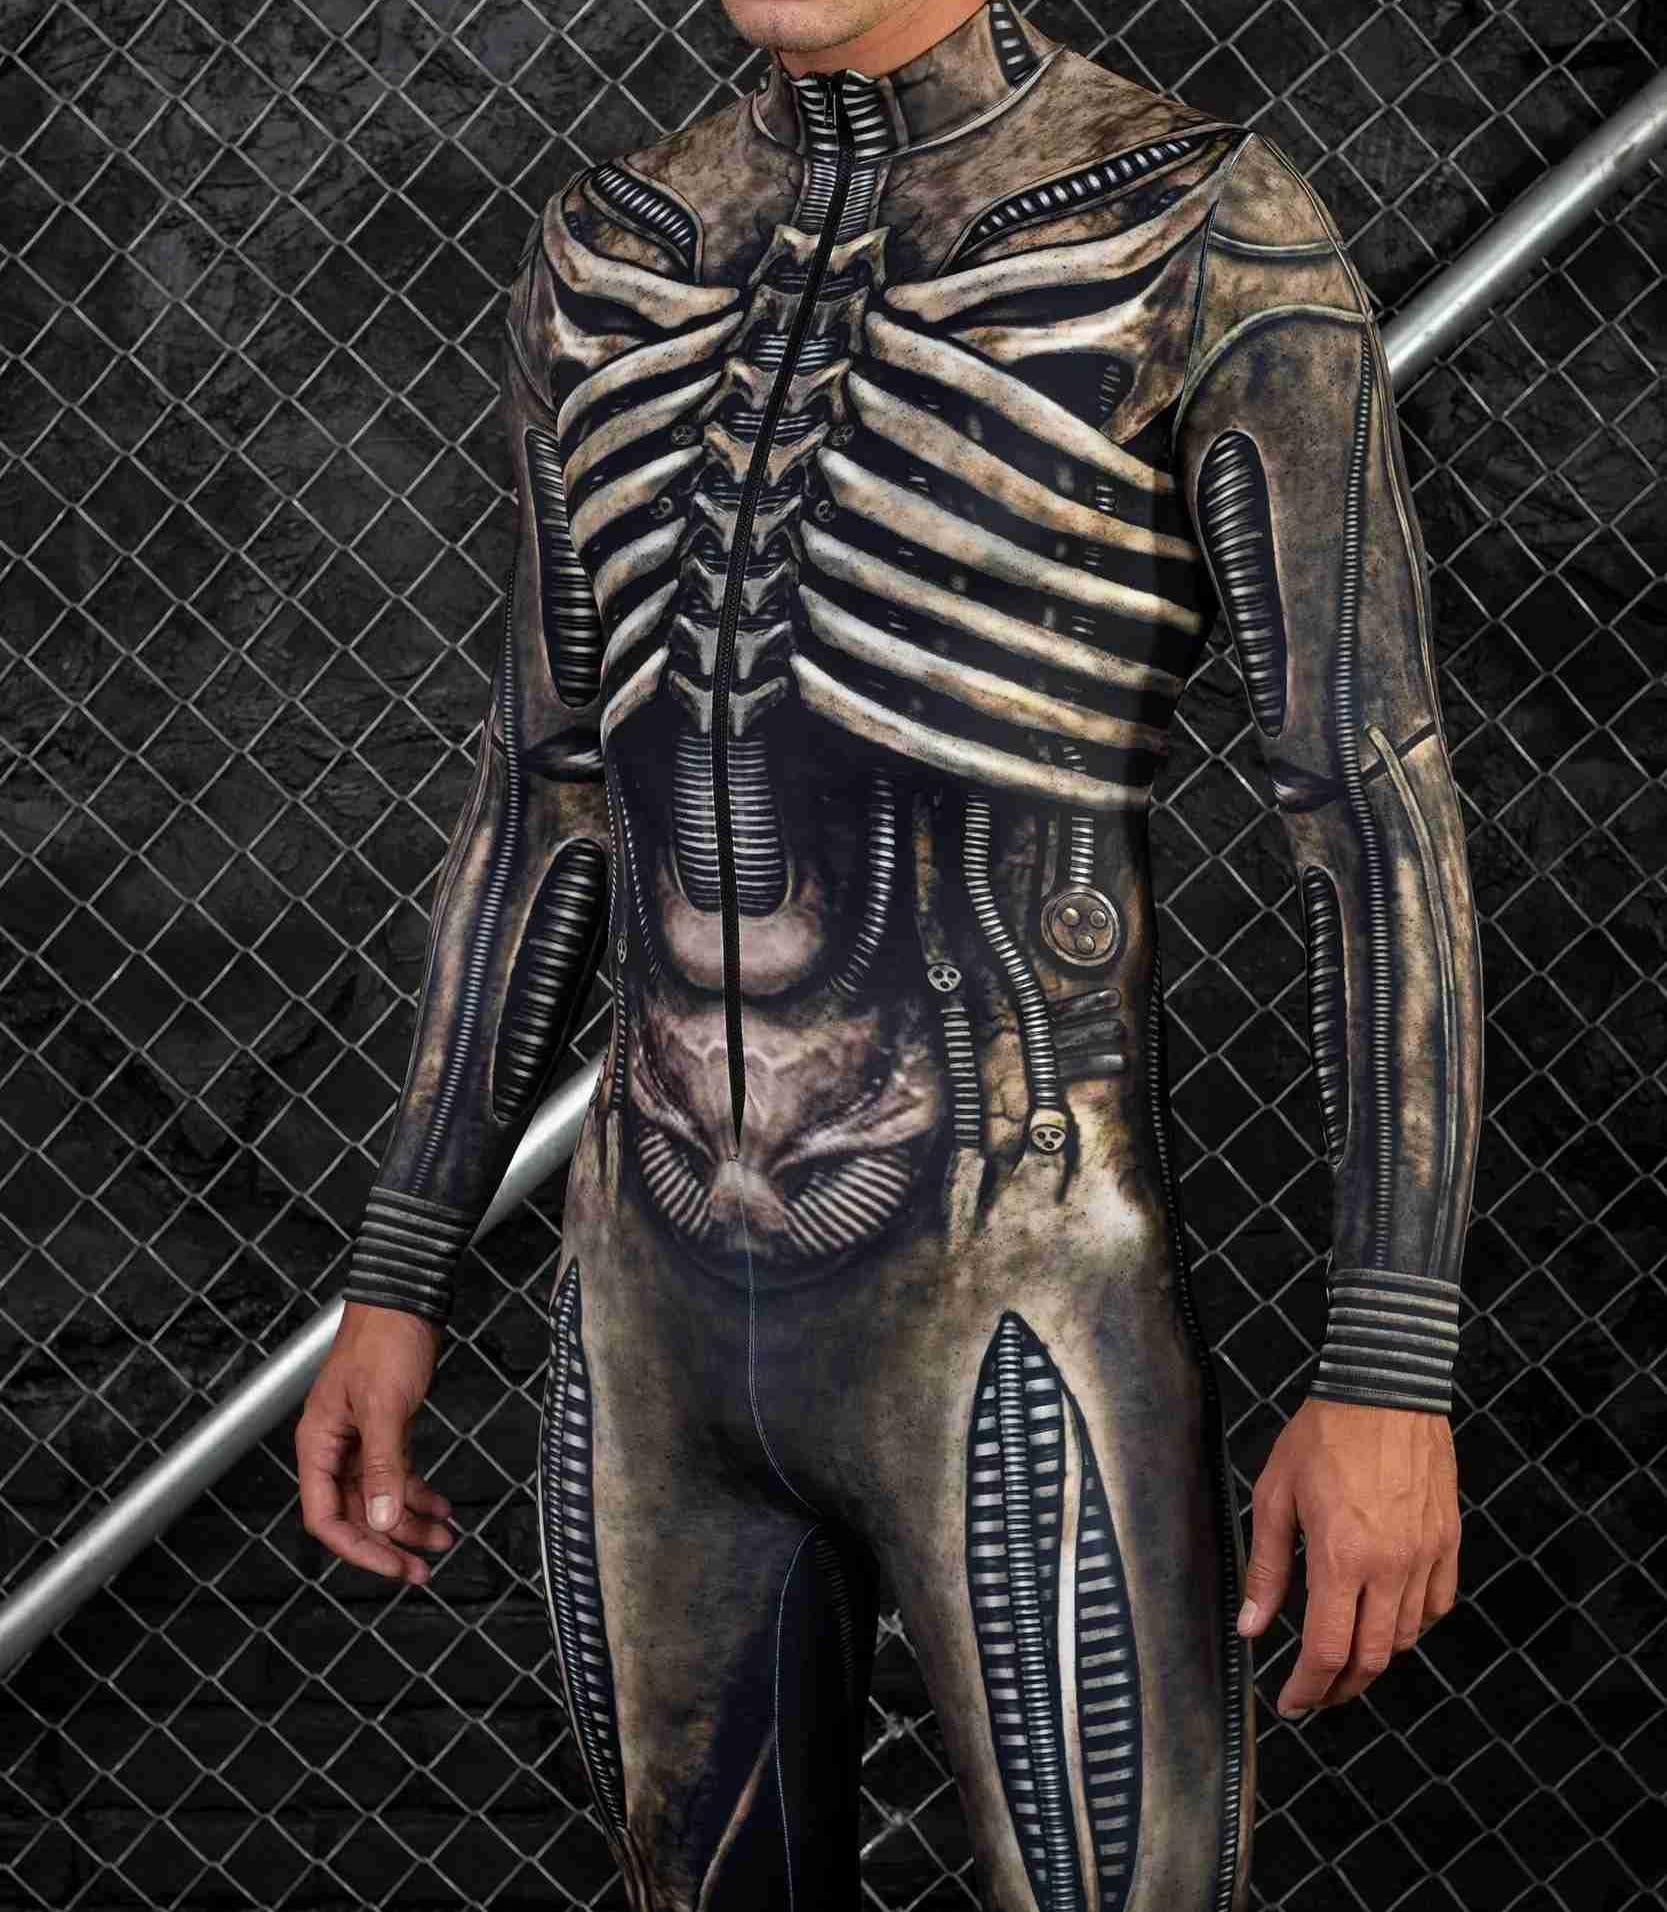 A person clad in a Maramalive™ Halloween New Tights 3D Digital Printing One-piece Play Costume with a detailed biomechanical design stands confidently in front of a chain-link fence, capturing the essence of street fashion. Available in children and adult sizes, this ensemble merges futuristic style with everyday urban flair.